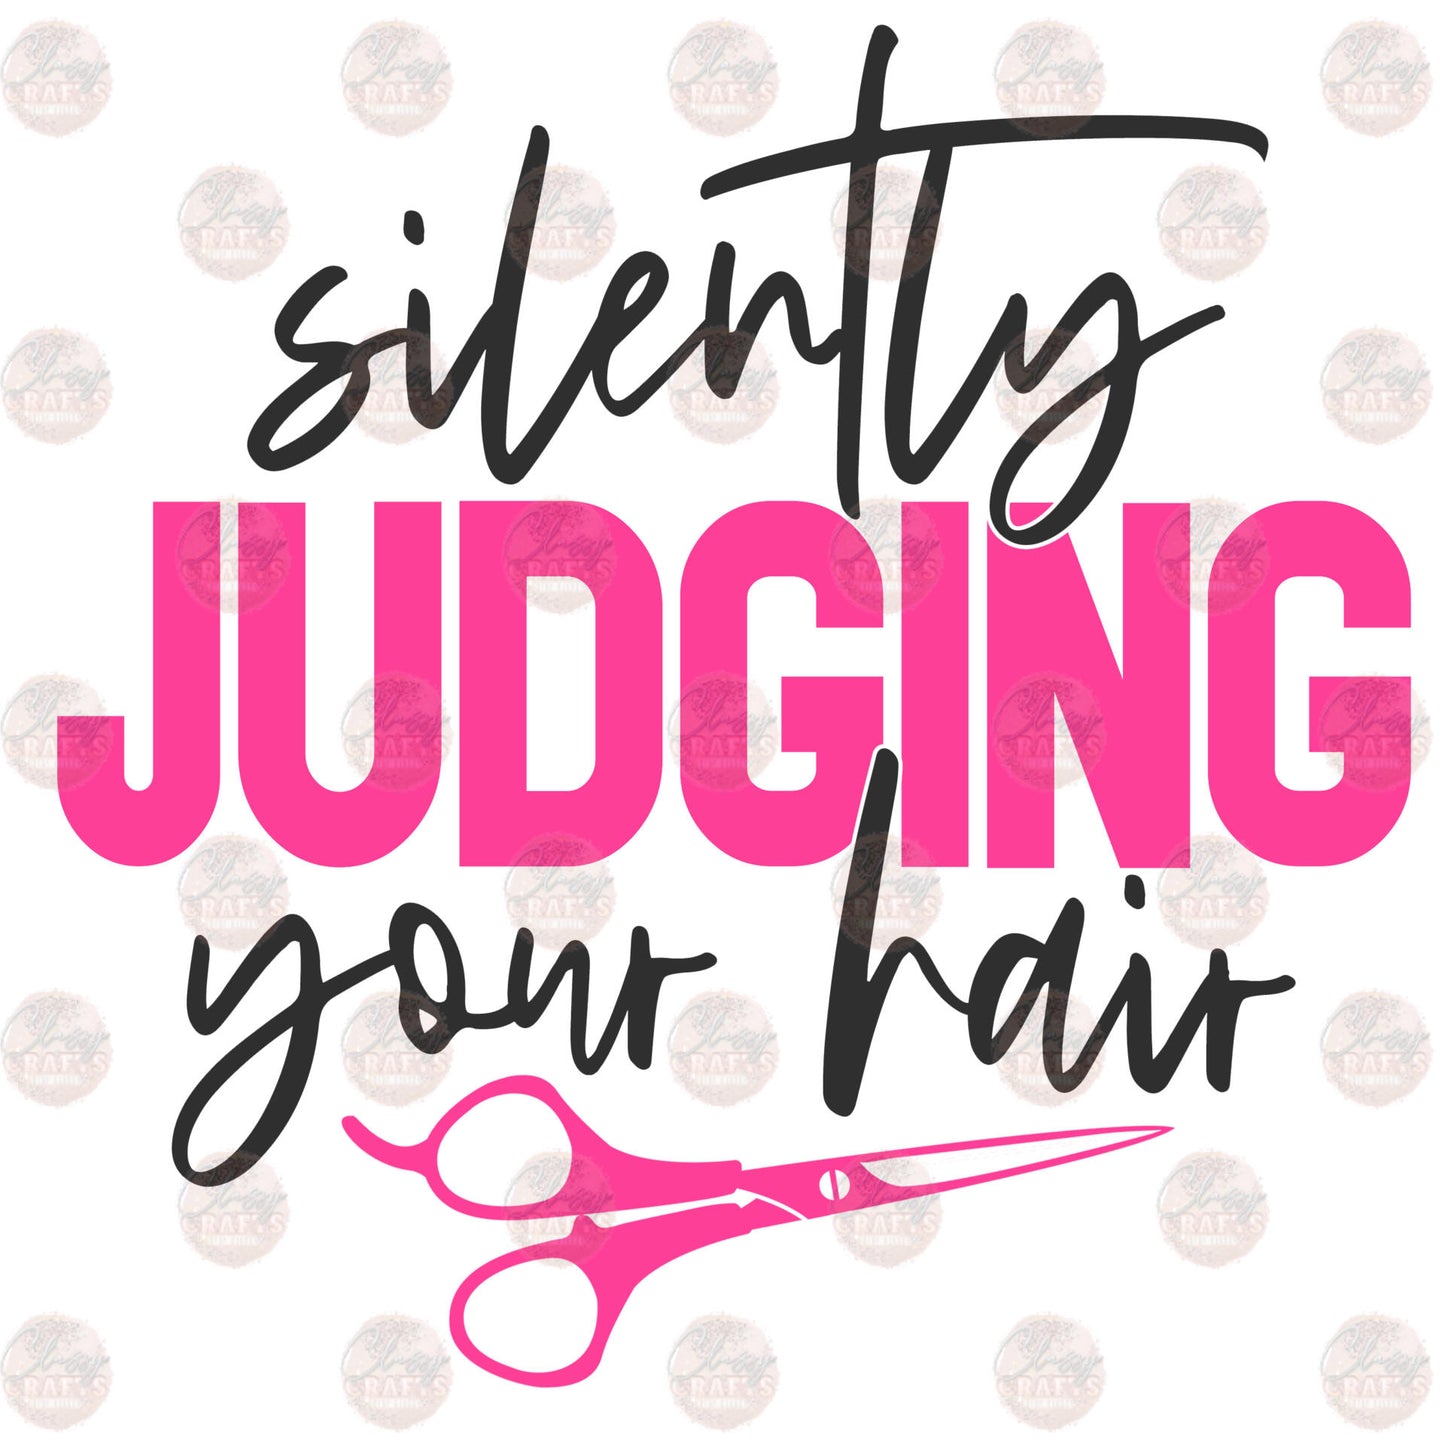 Silently Judging Your Hair - Sublimation Transfer